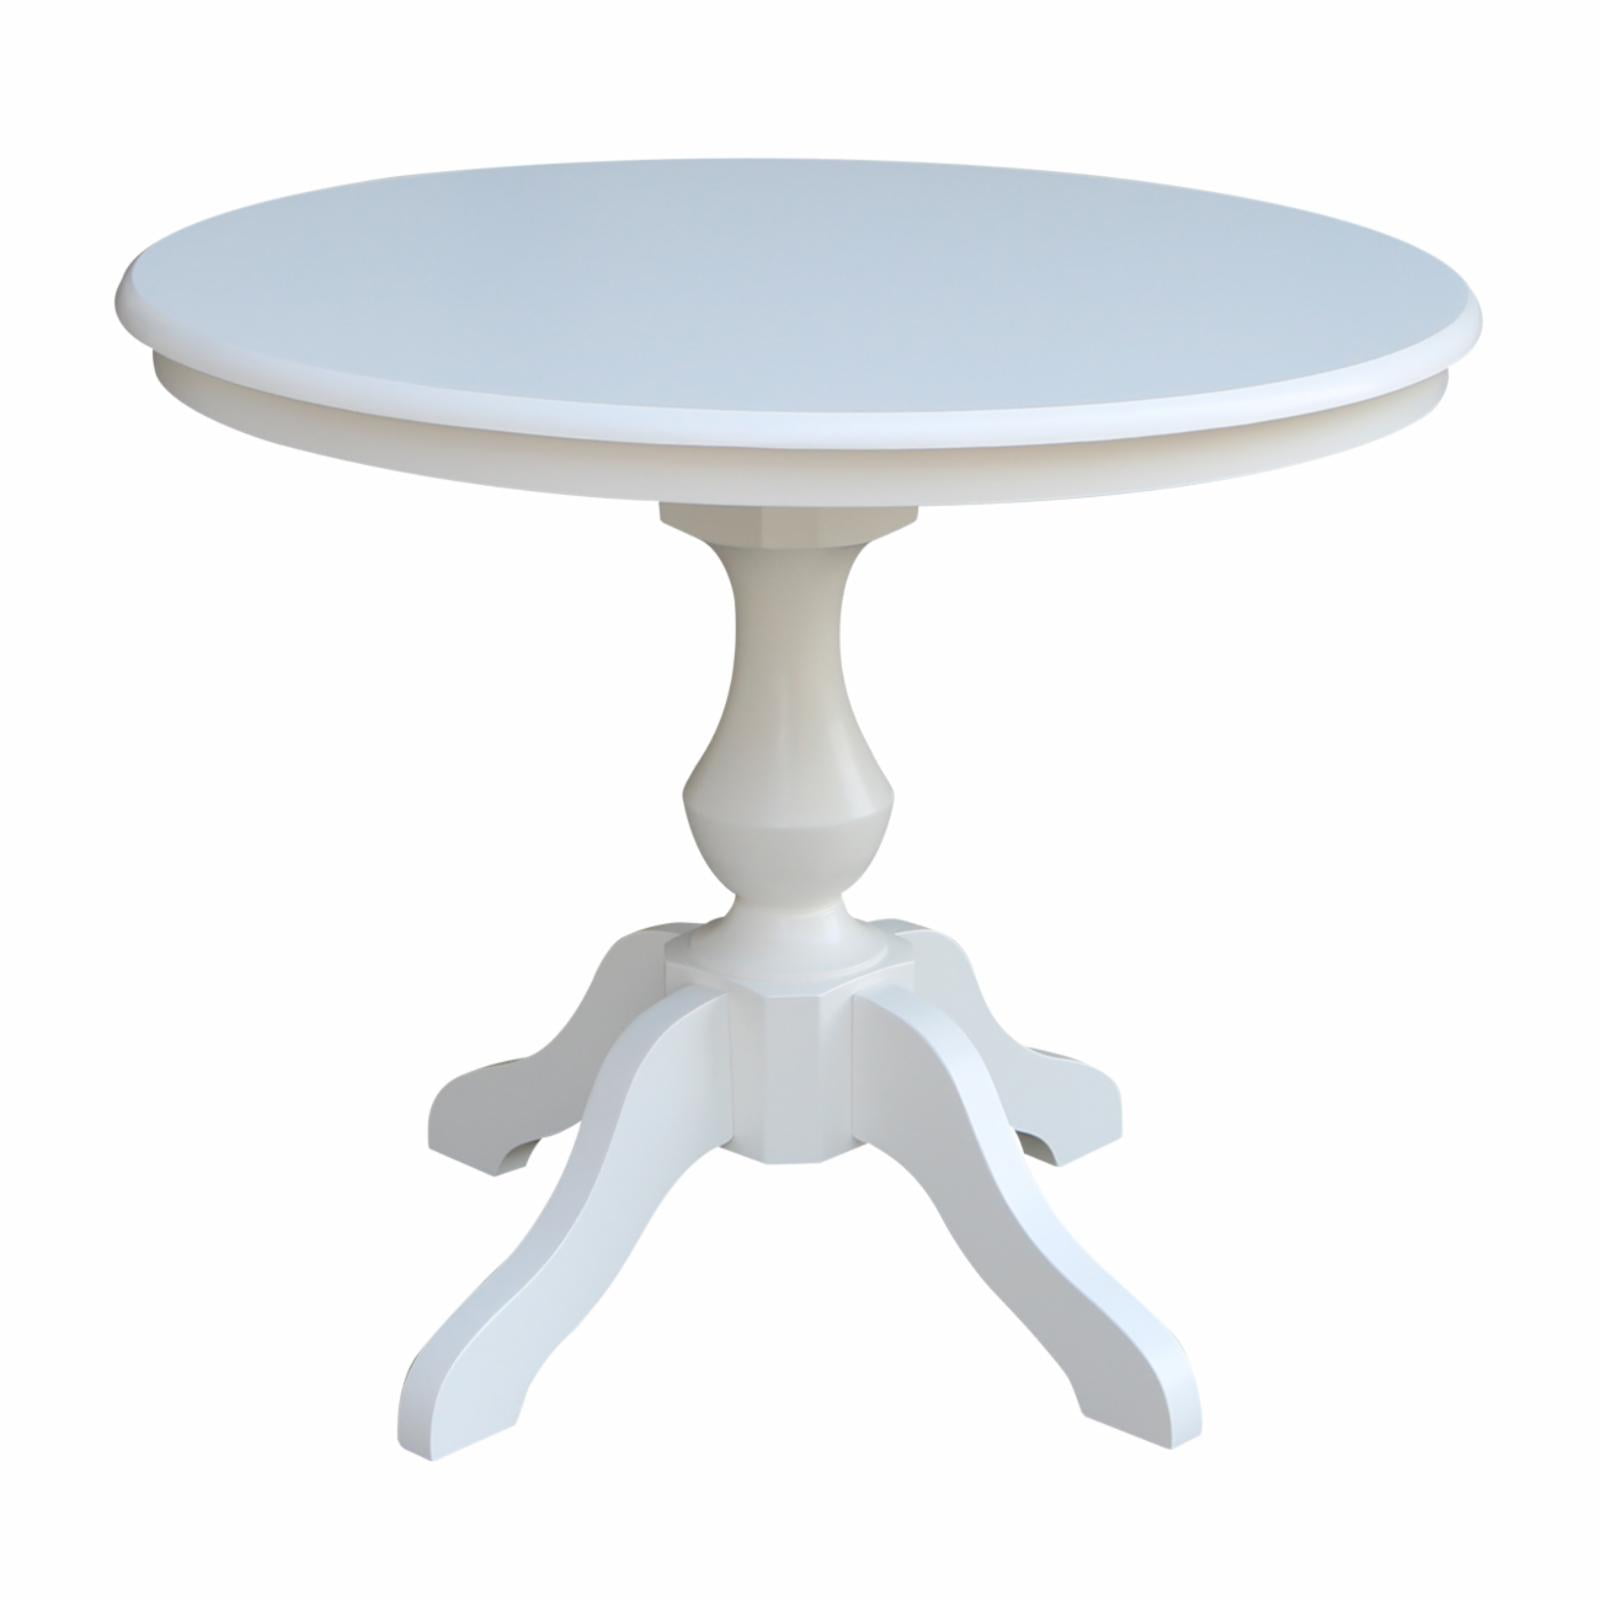 36" Round Top Pedestal Dining Table - White